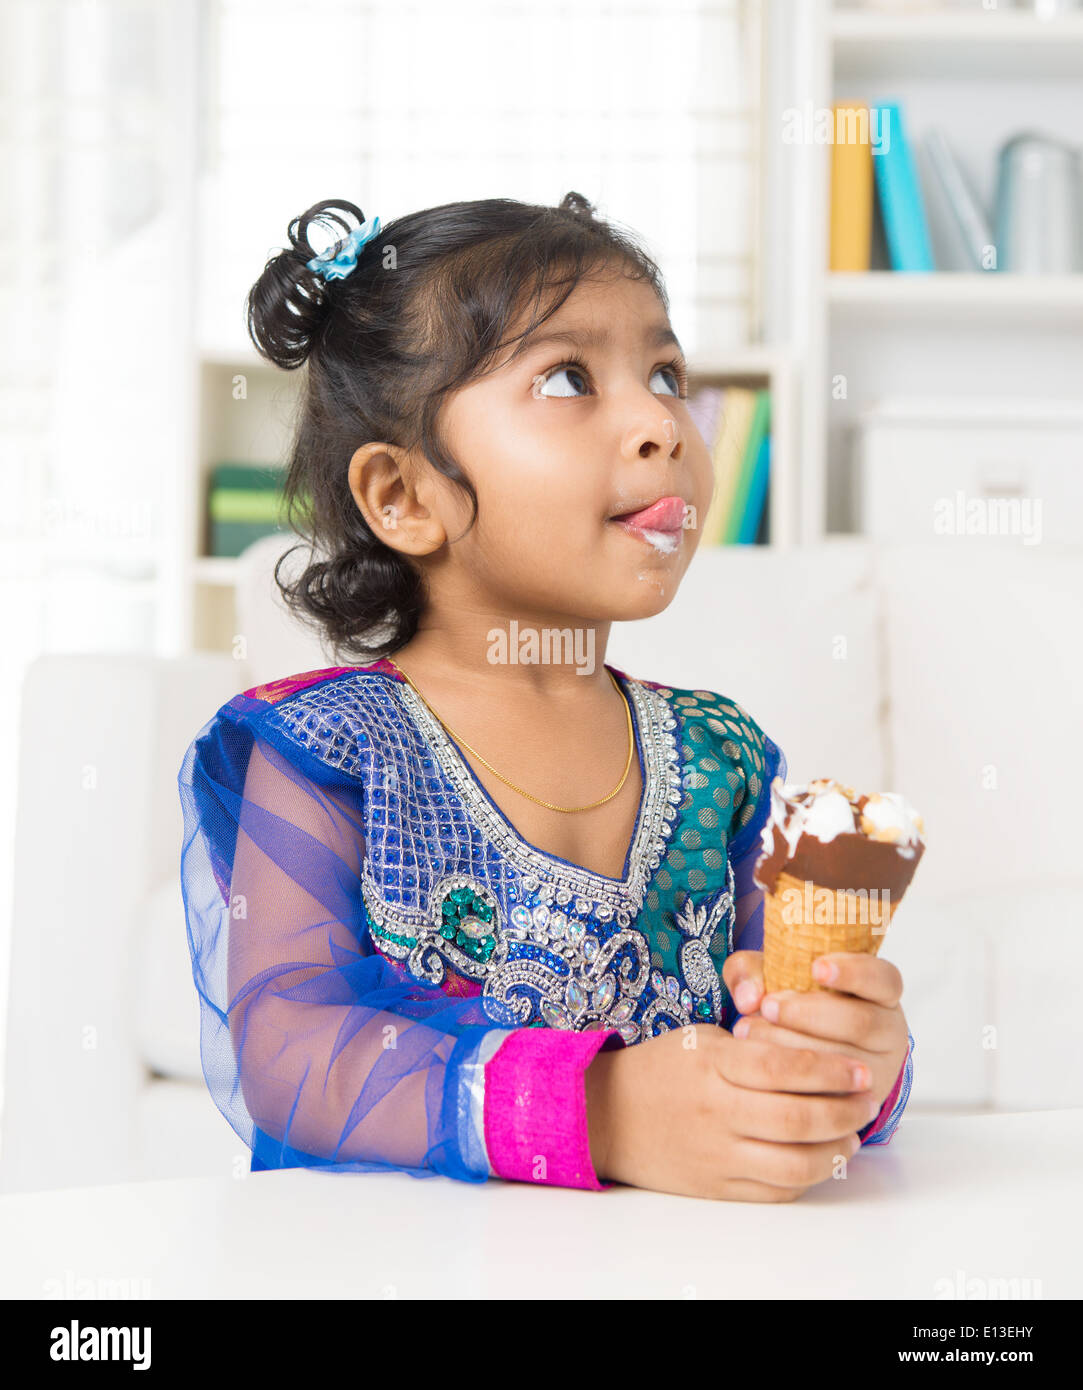 Little Indian girl licking her lips with an ice cream cone in hand, family living lifestyle at home. Stock Photo